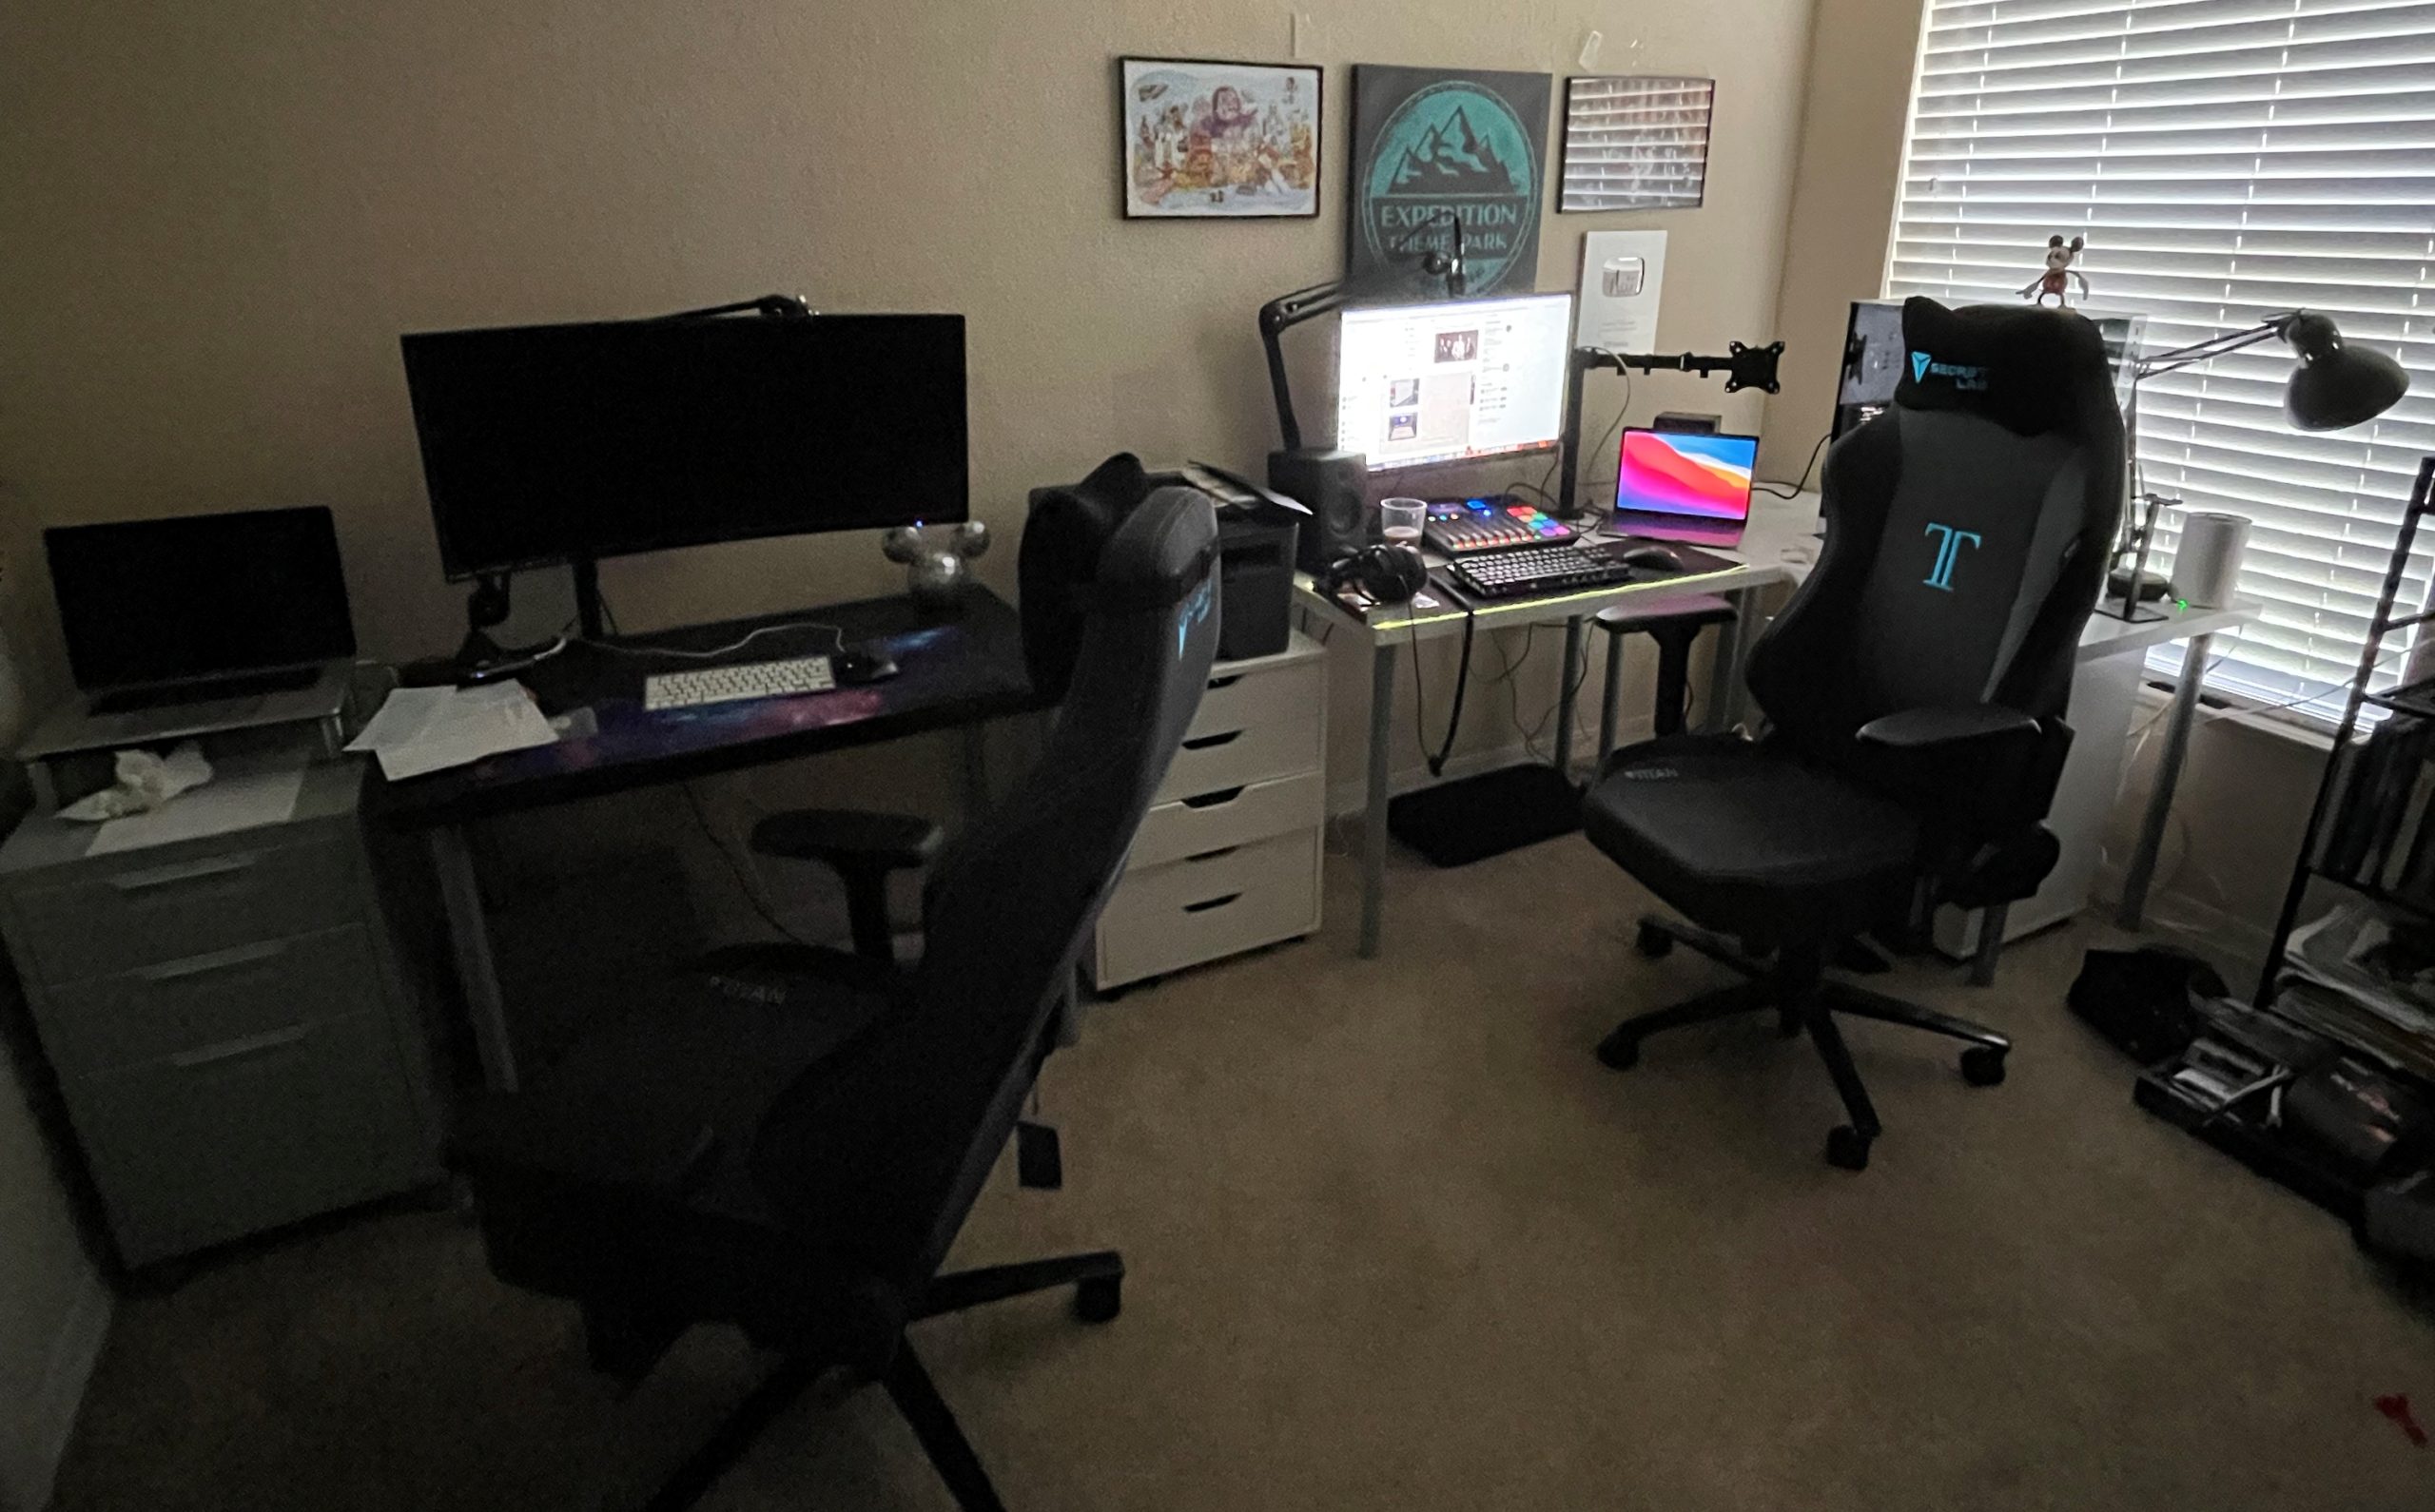 Building a couples editing & gaming Desk: Making the Expedition